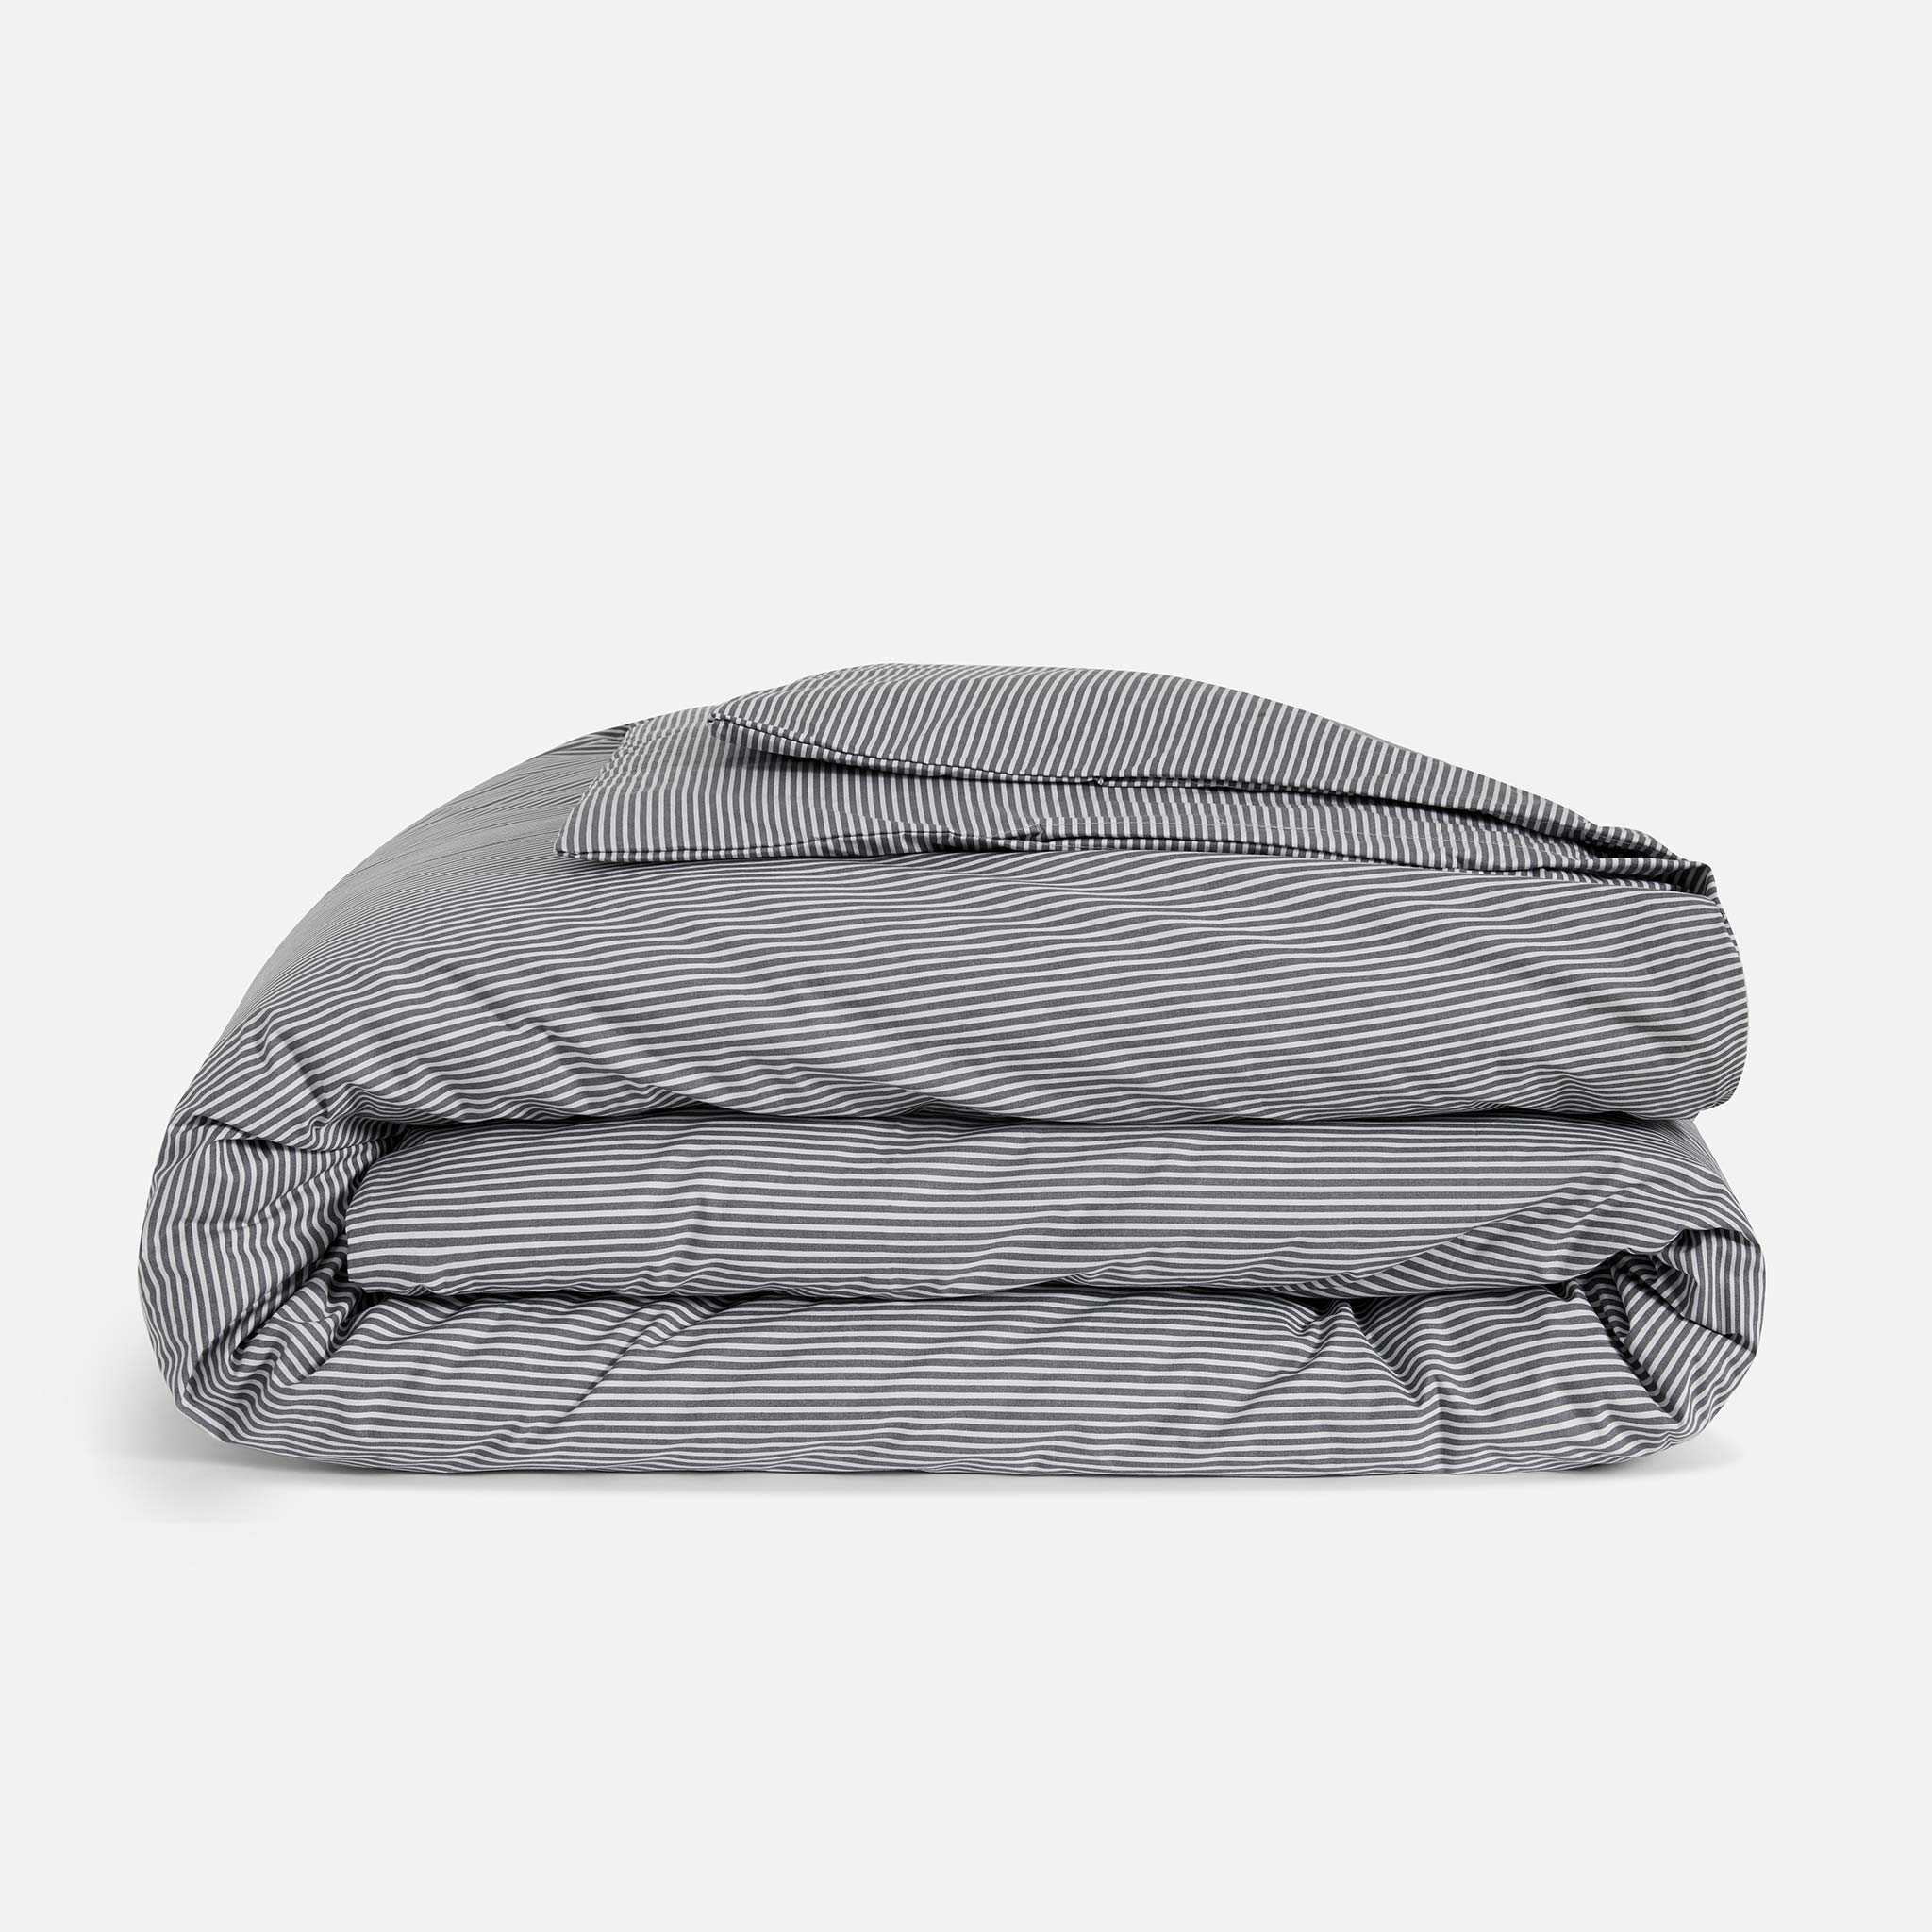 Brooklinen Luxe Sateen Duvet Cover size King/Cali King in Graphite and Steel Oxford Stripe